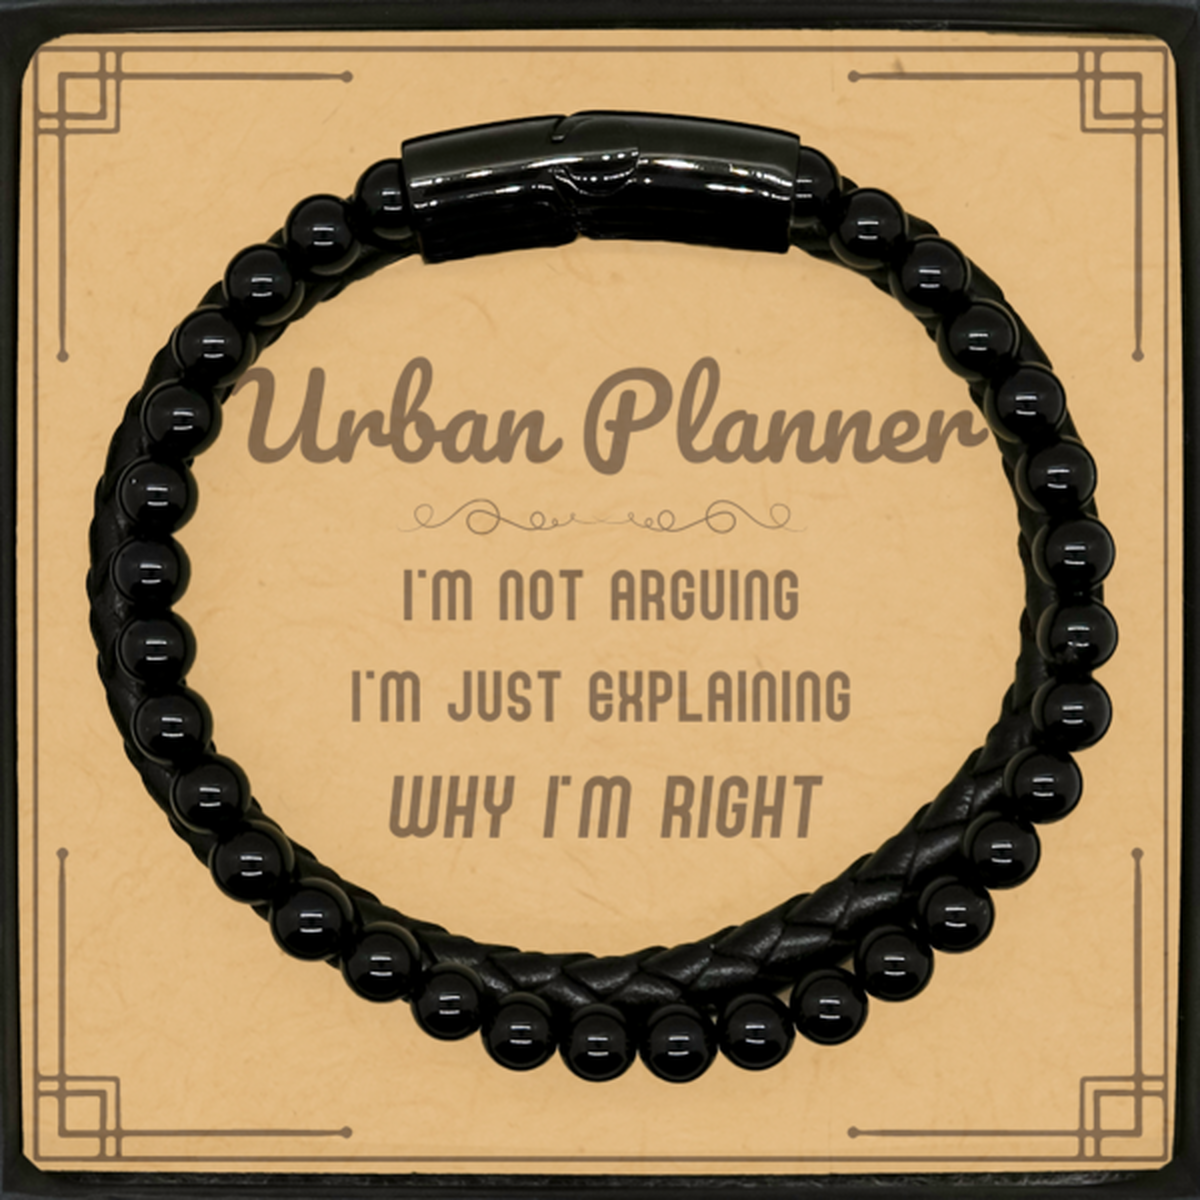 Urban Planner I'm not Arguing. I'm Just Explaining Why I'm RIGHT Stone Leather Bracelets, Funny Saying Quote Urban Planner Gifts For Urban Planner Message Card Graduation Birthday Christmas Gifts for Men Women Coworker